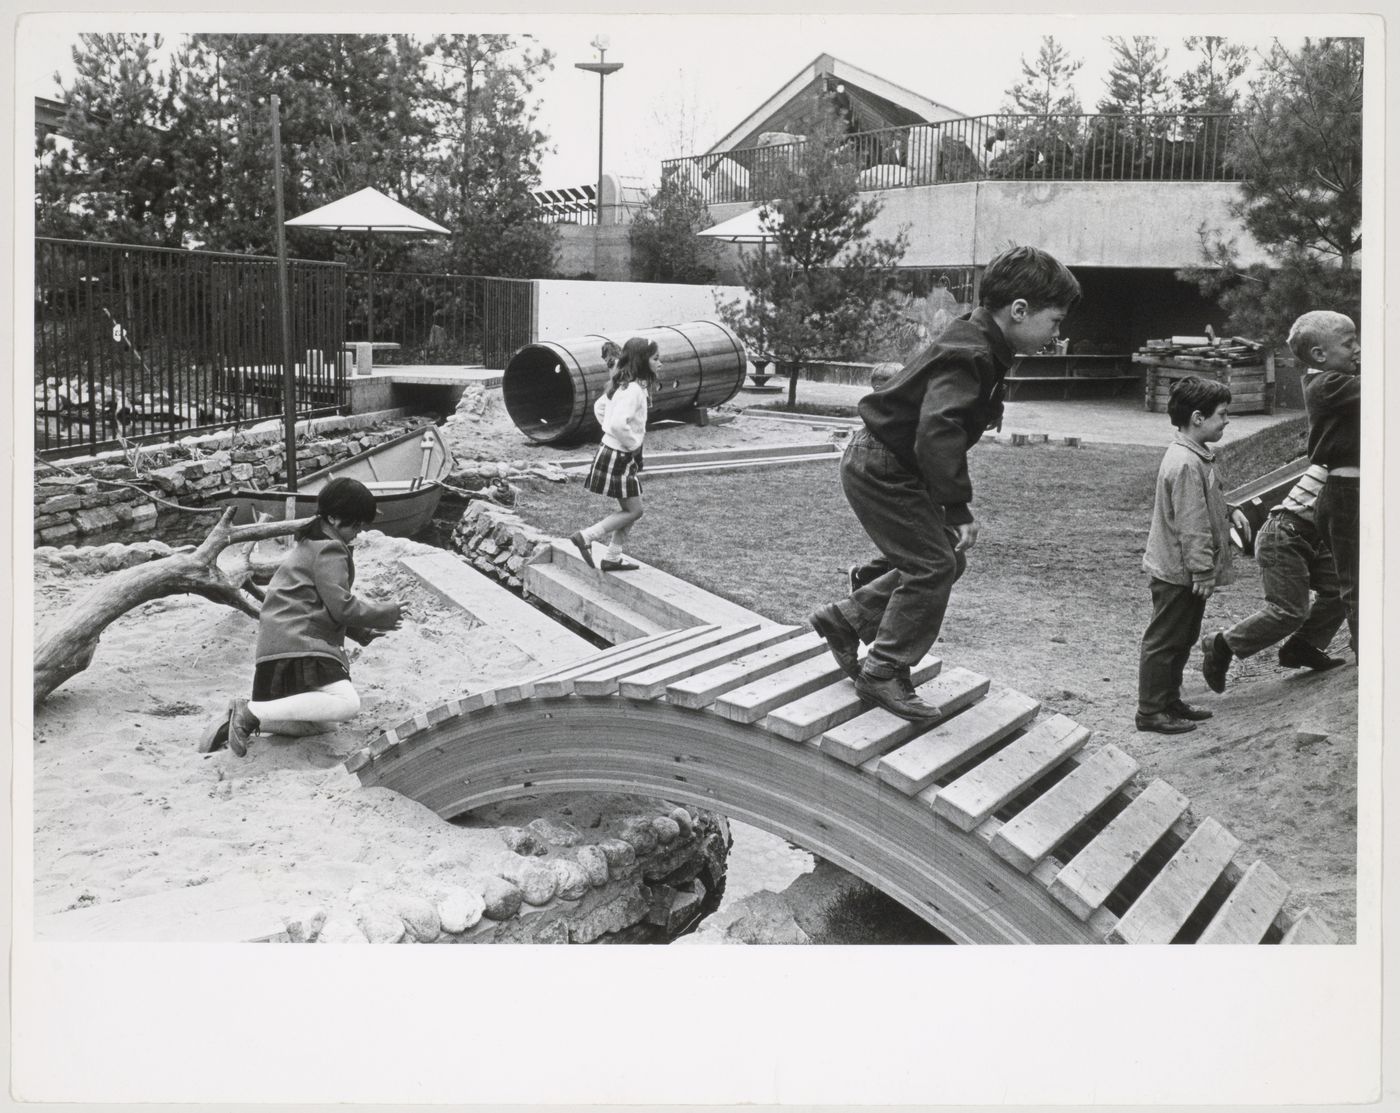 View of children playing at Children's Creative Centre Playground, Canadian Federal Pavilion, Expo '67, Montréal, Québec